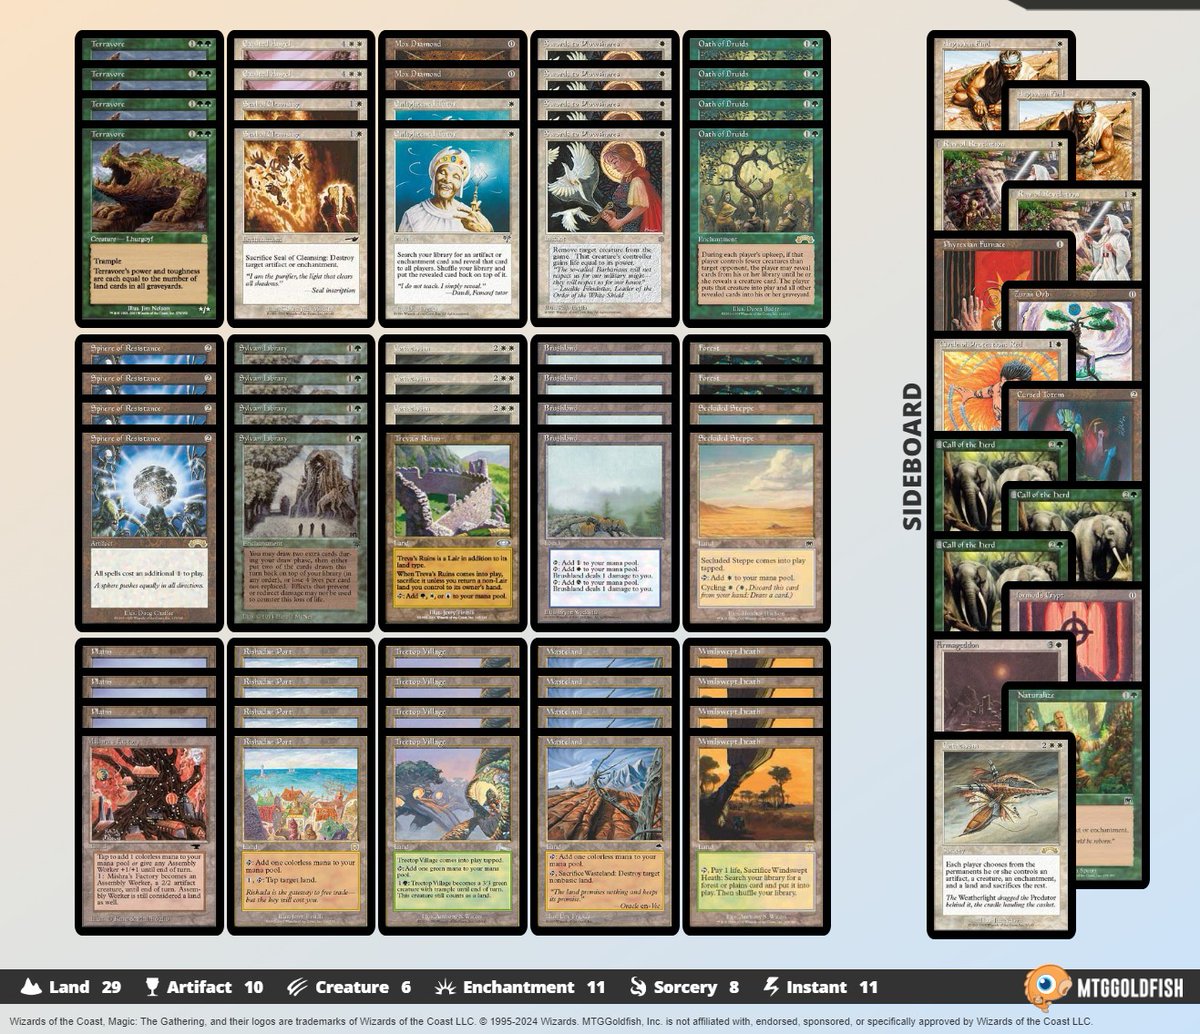 mtg_old_channel tweet picture